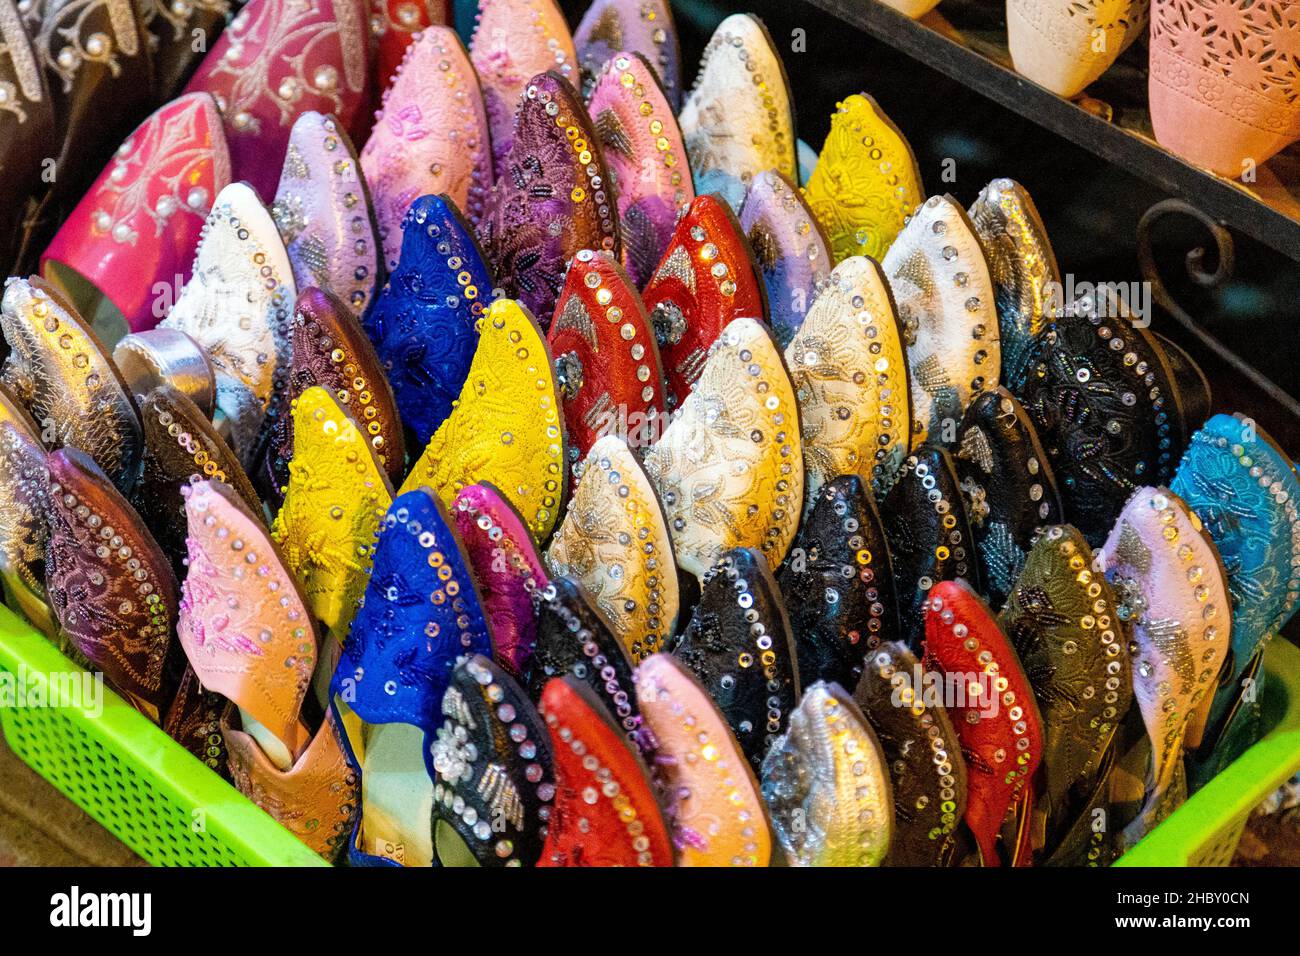 Selection of traditional colourful Moroccan slippers at a market stall in the Median souks in Marrakesh, Morocco Stock Photo